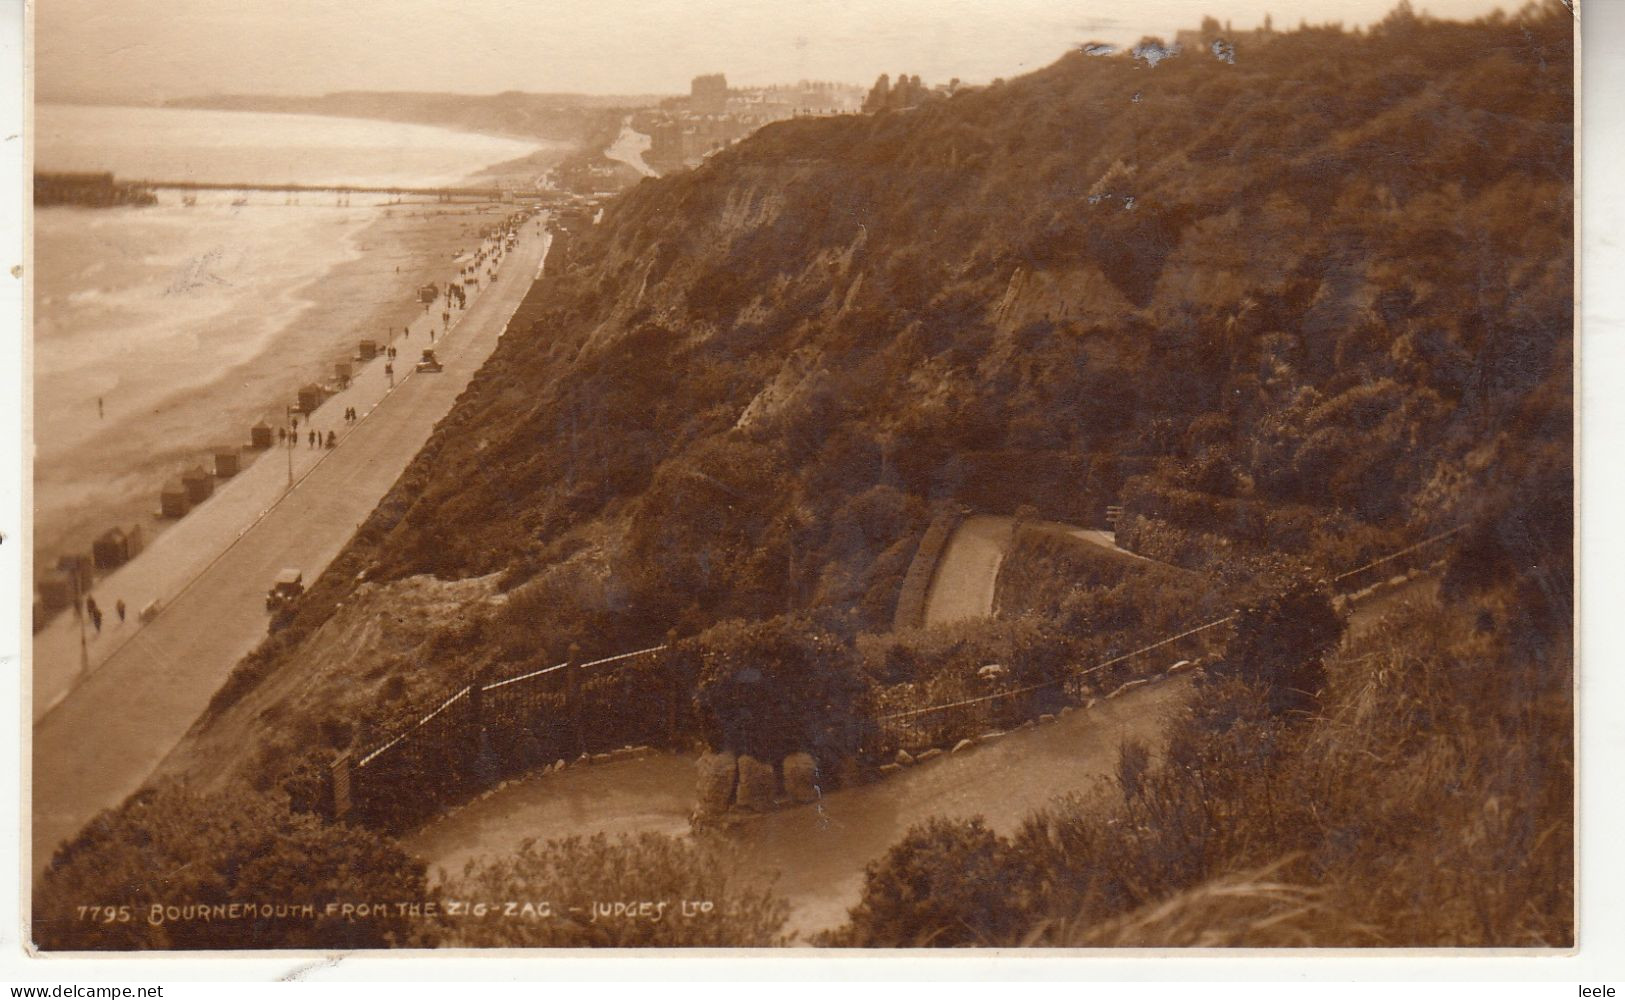 CE59. Vintage Judges Postcard. Bournemouth From The Zig Zag. Sussex - Bournemouth (until 1972)